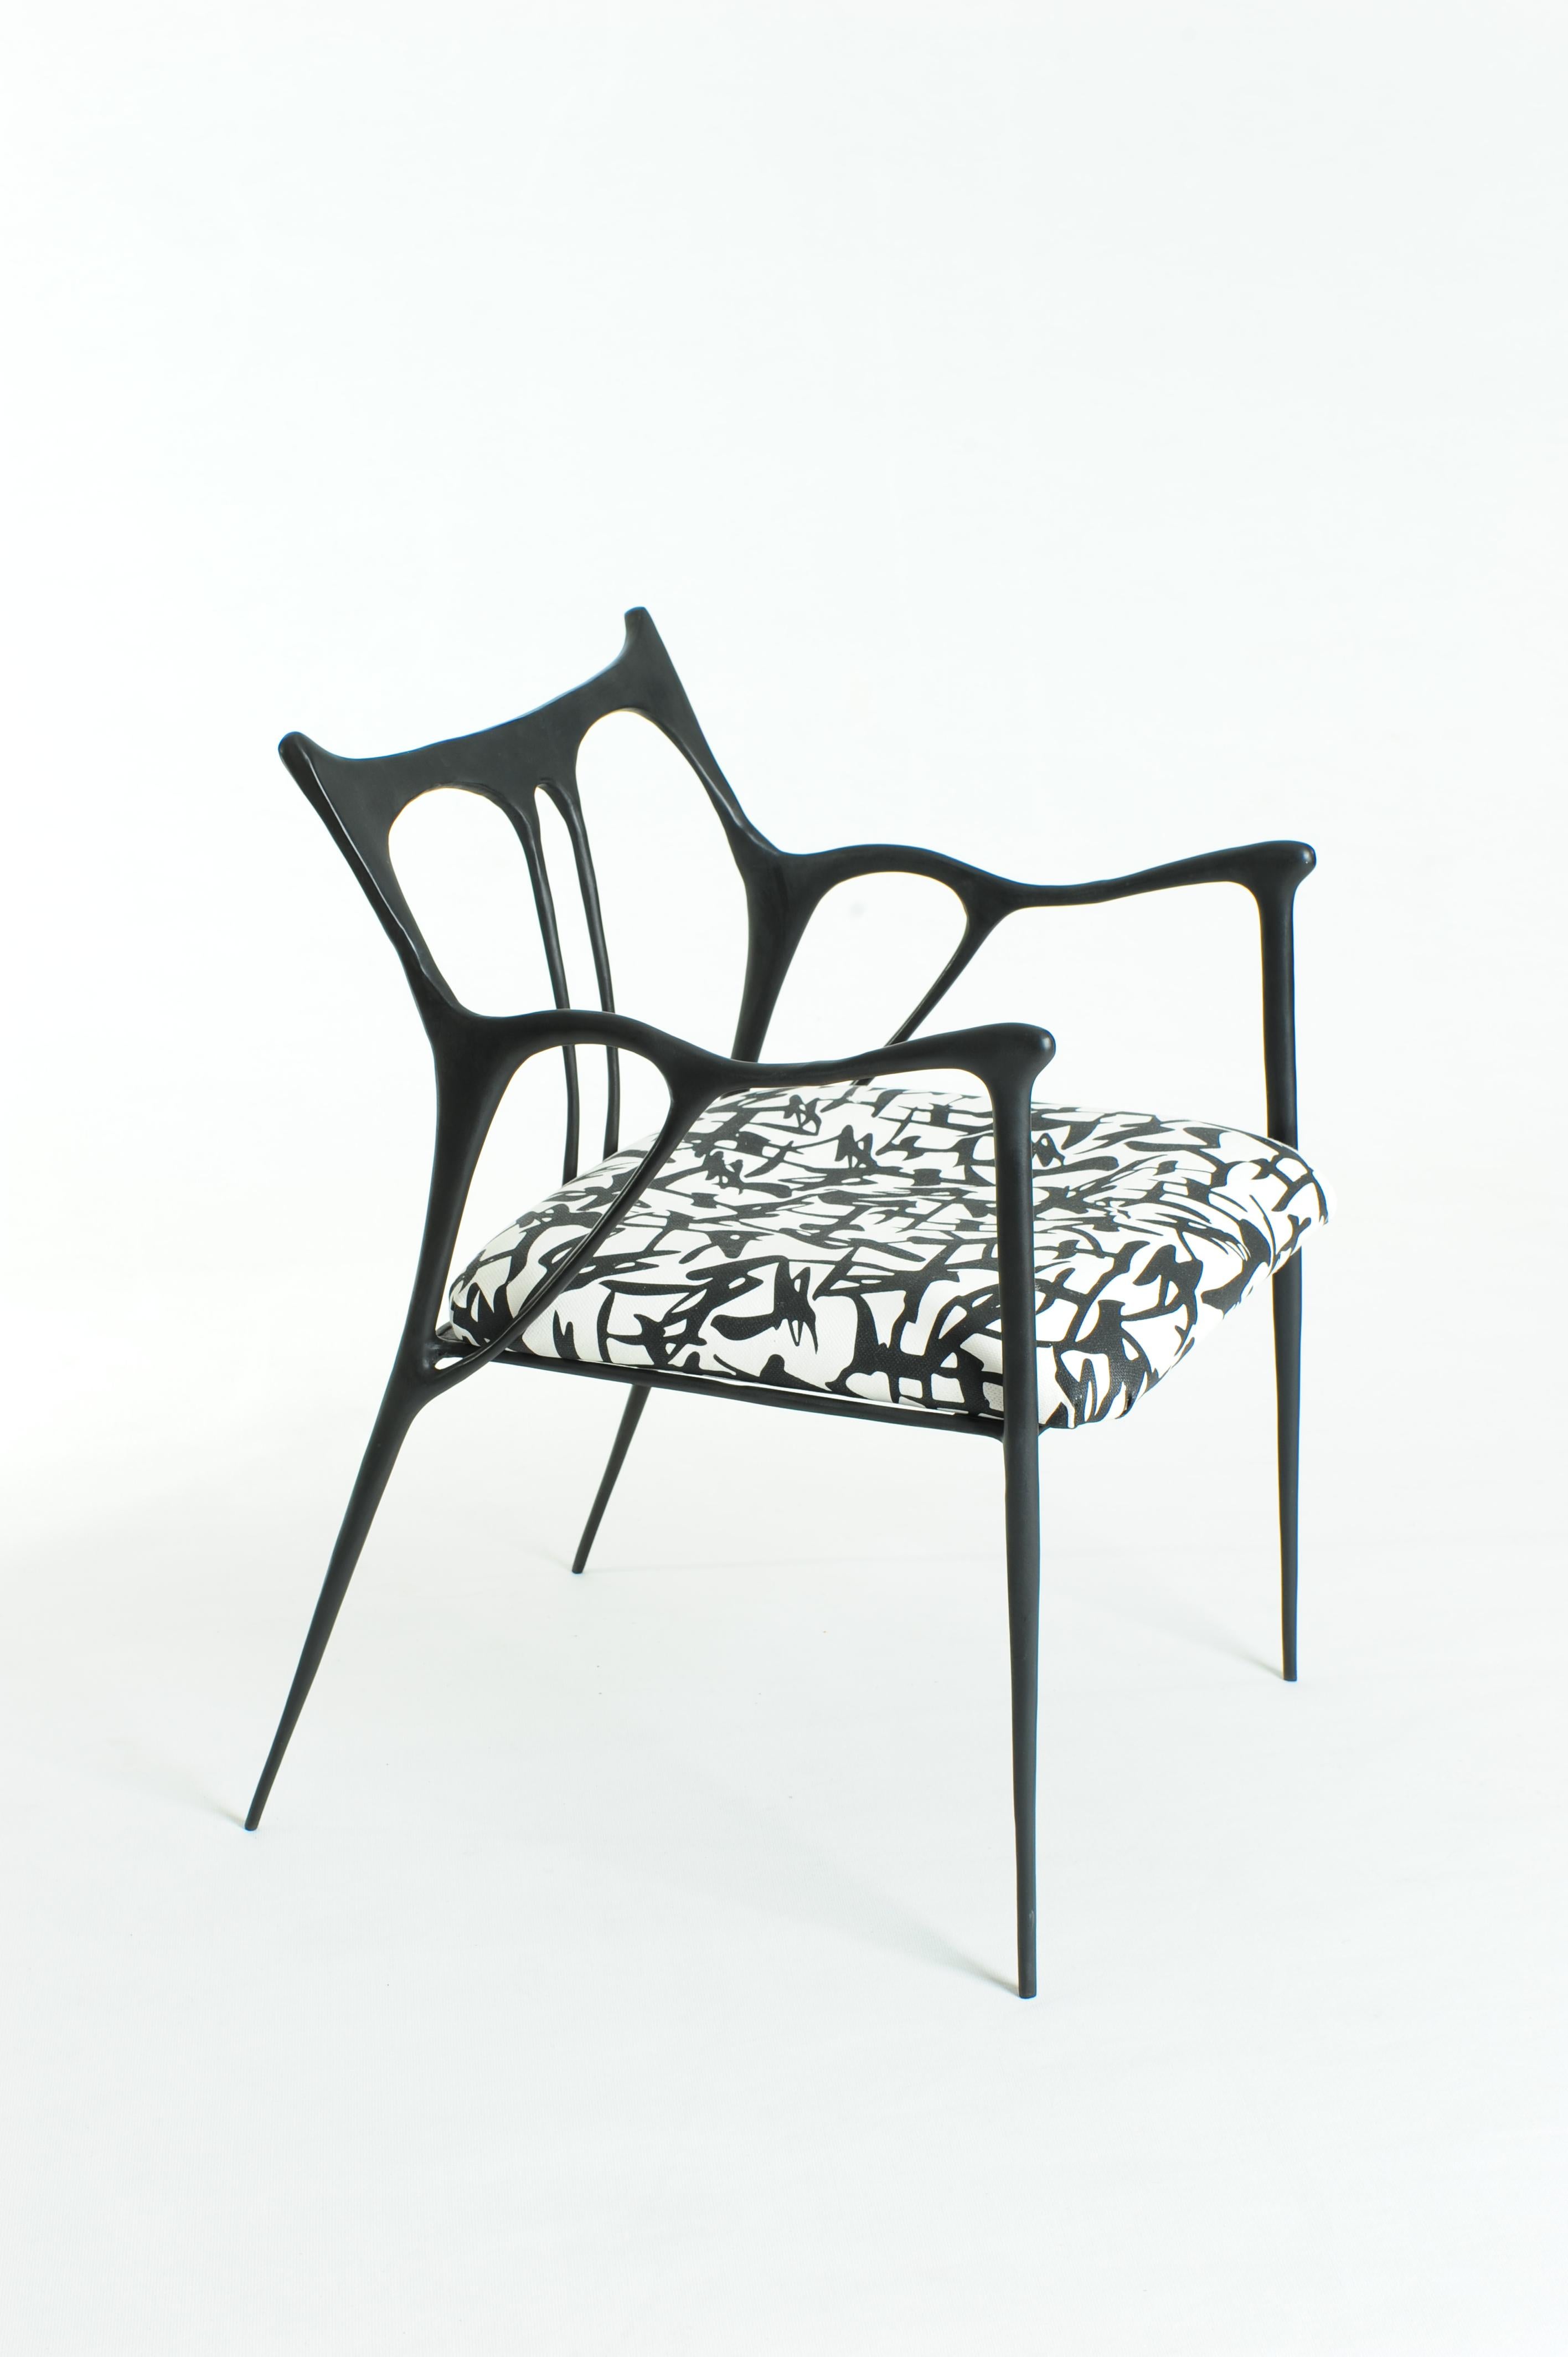 Black brass sculpted chair by Misaya
Dimensions: W 54 x L 58 x H 79 cm (seating: 63)
Hand-sculpted chair in brass.
 
Misaya emulates Chinese ink paintings through the process of lost-wax casting.

Each piece in the Ink collection – which